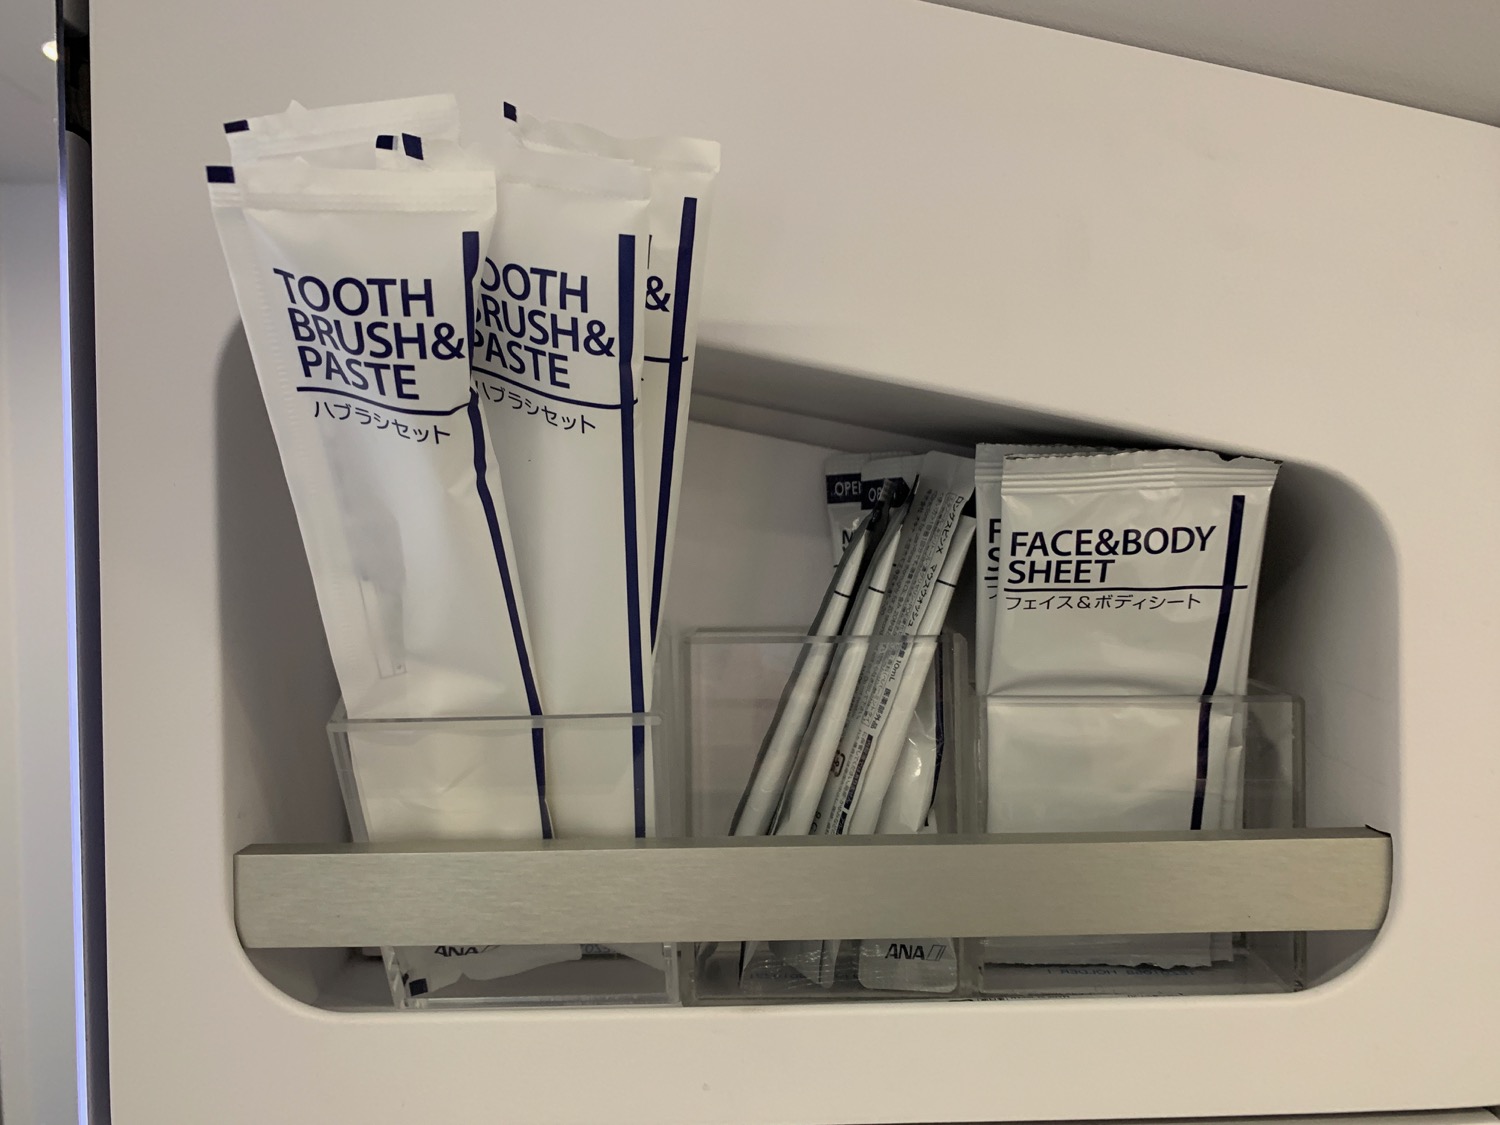 a group of toothbrushes and toothpaste in a shelf